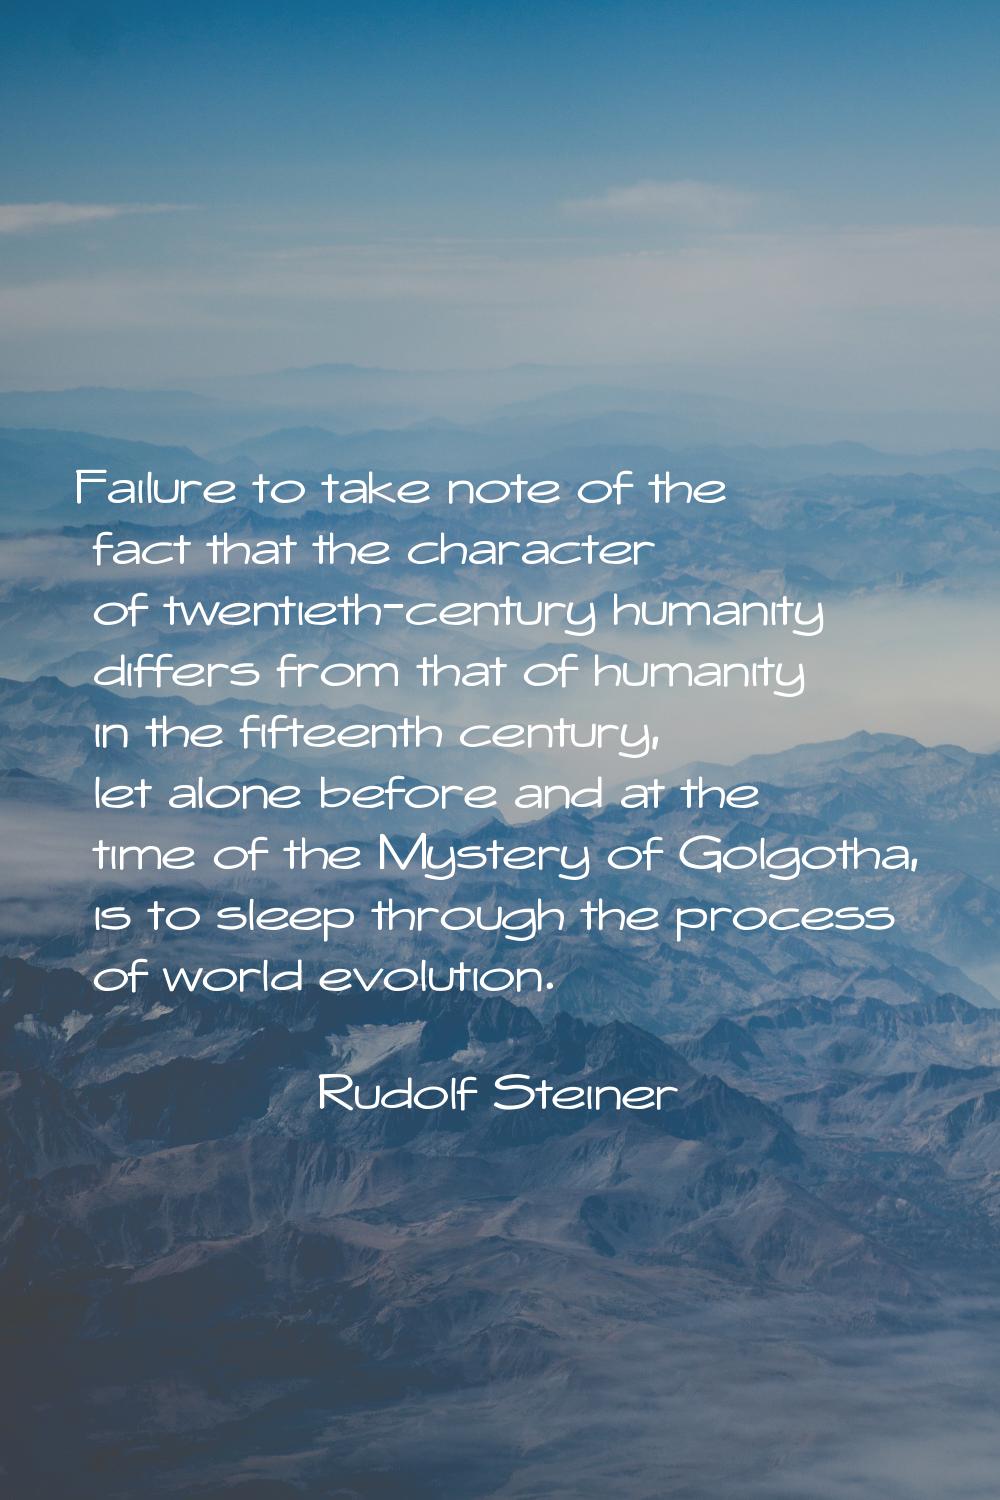 Failure to take note of the fact that the character of twentieth-century humanity differs from that